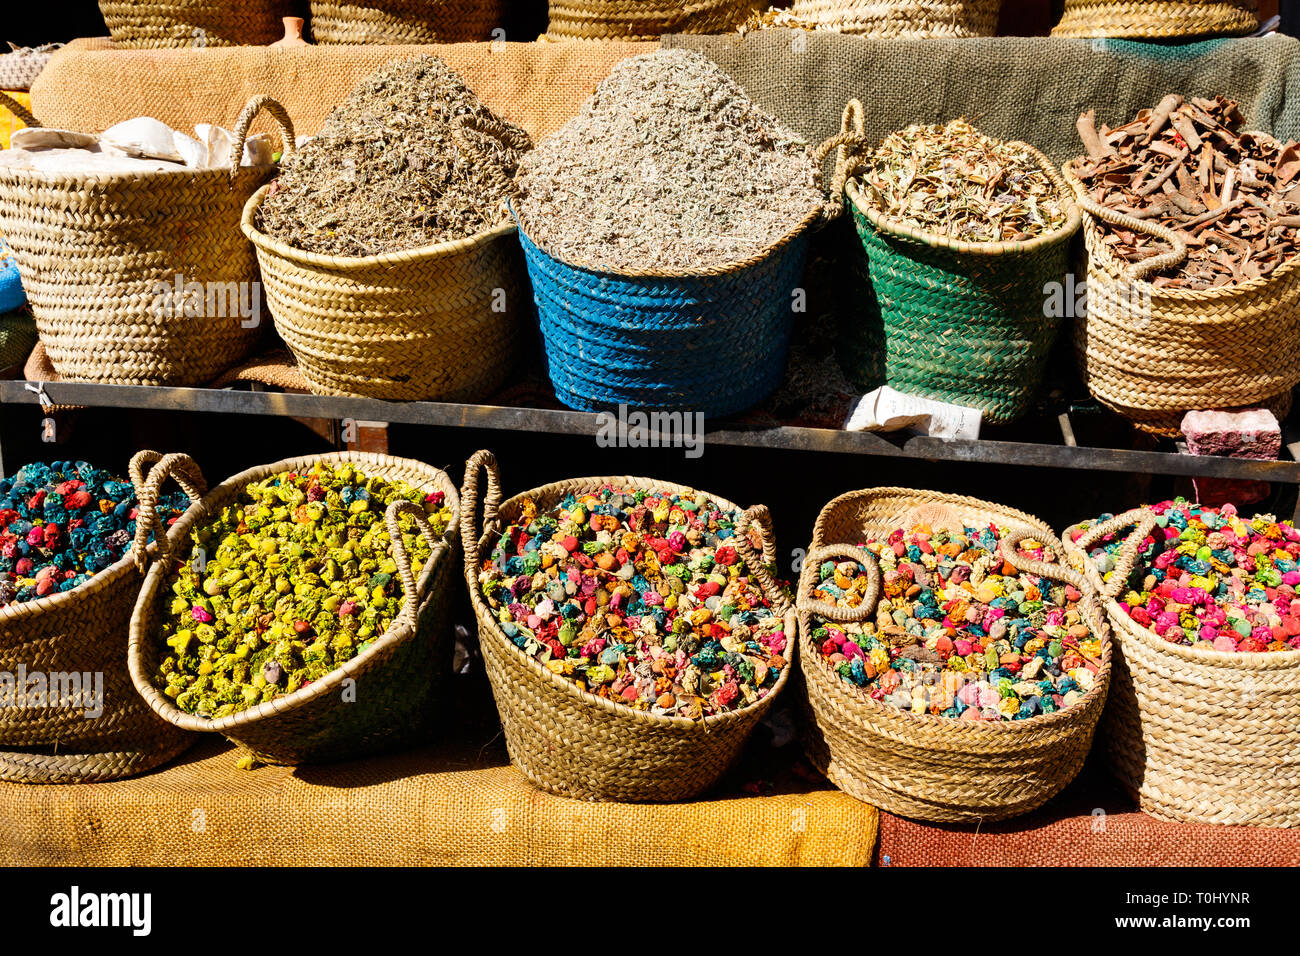 Colorful cooking Spices and flower in traditional local medina bazaar market in Marrakesh, Morocco Stock Photo